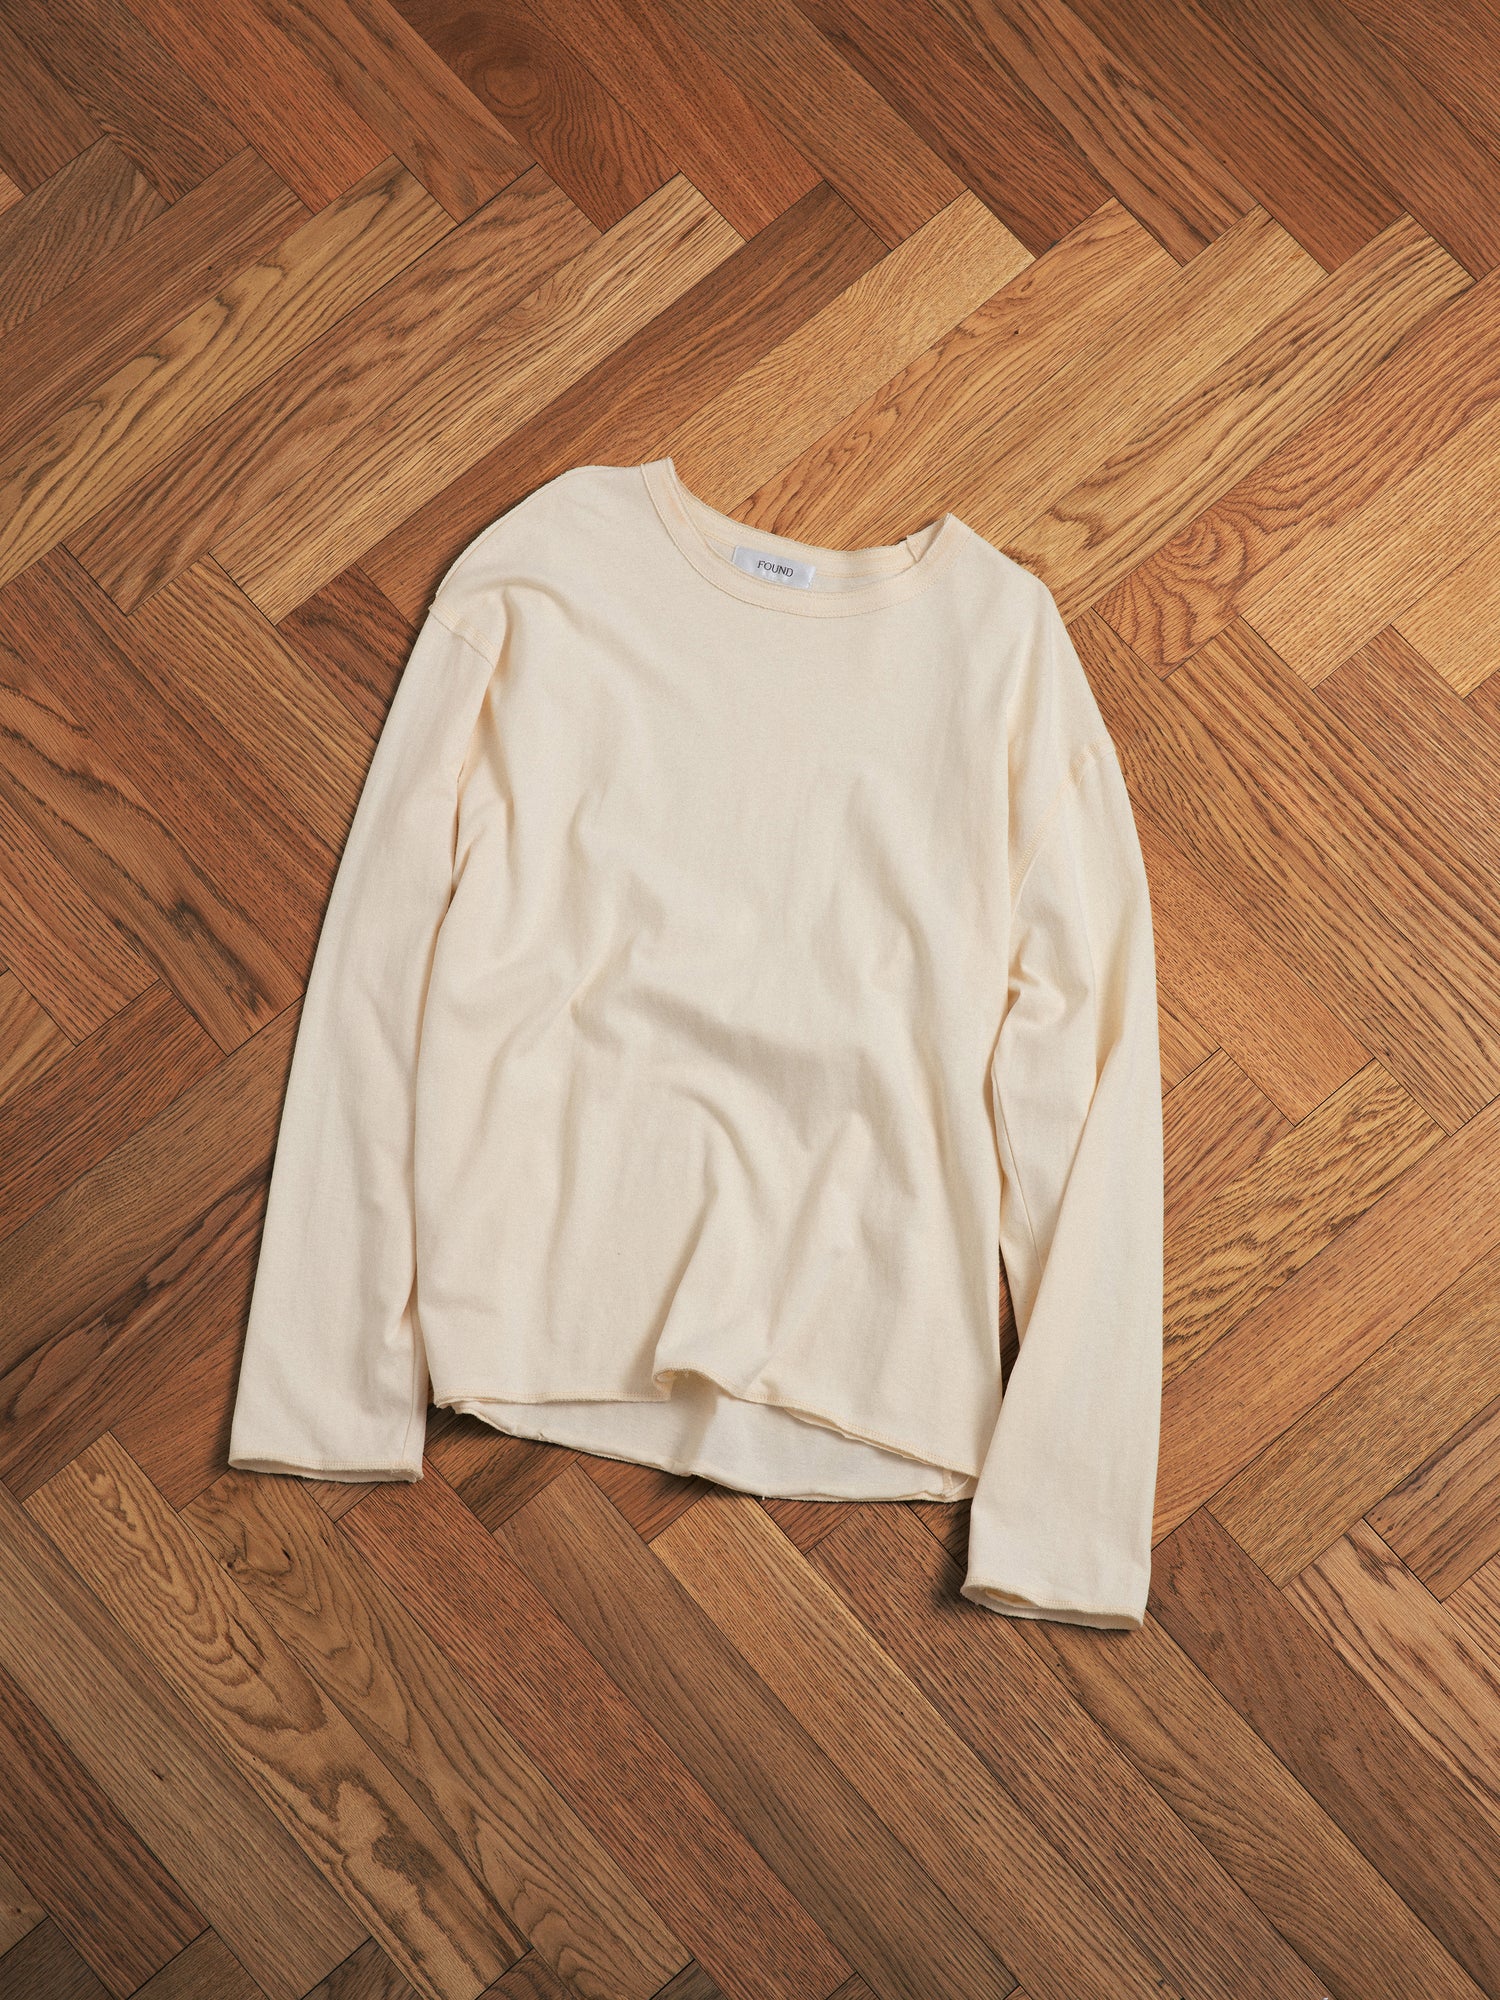 A white long-sleeved Profound Reversed LS Tee, crafted with premium materials, lies on a wooden floor.